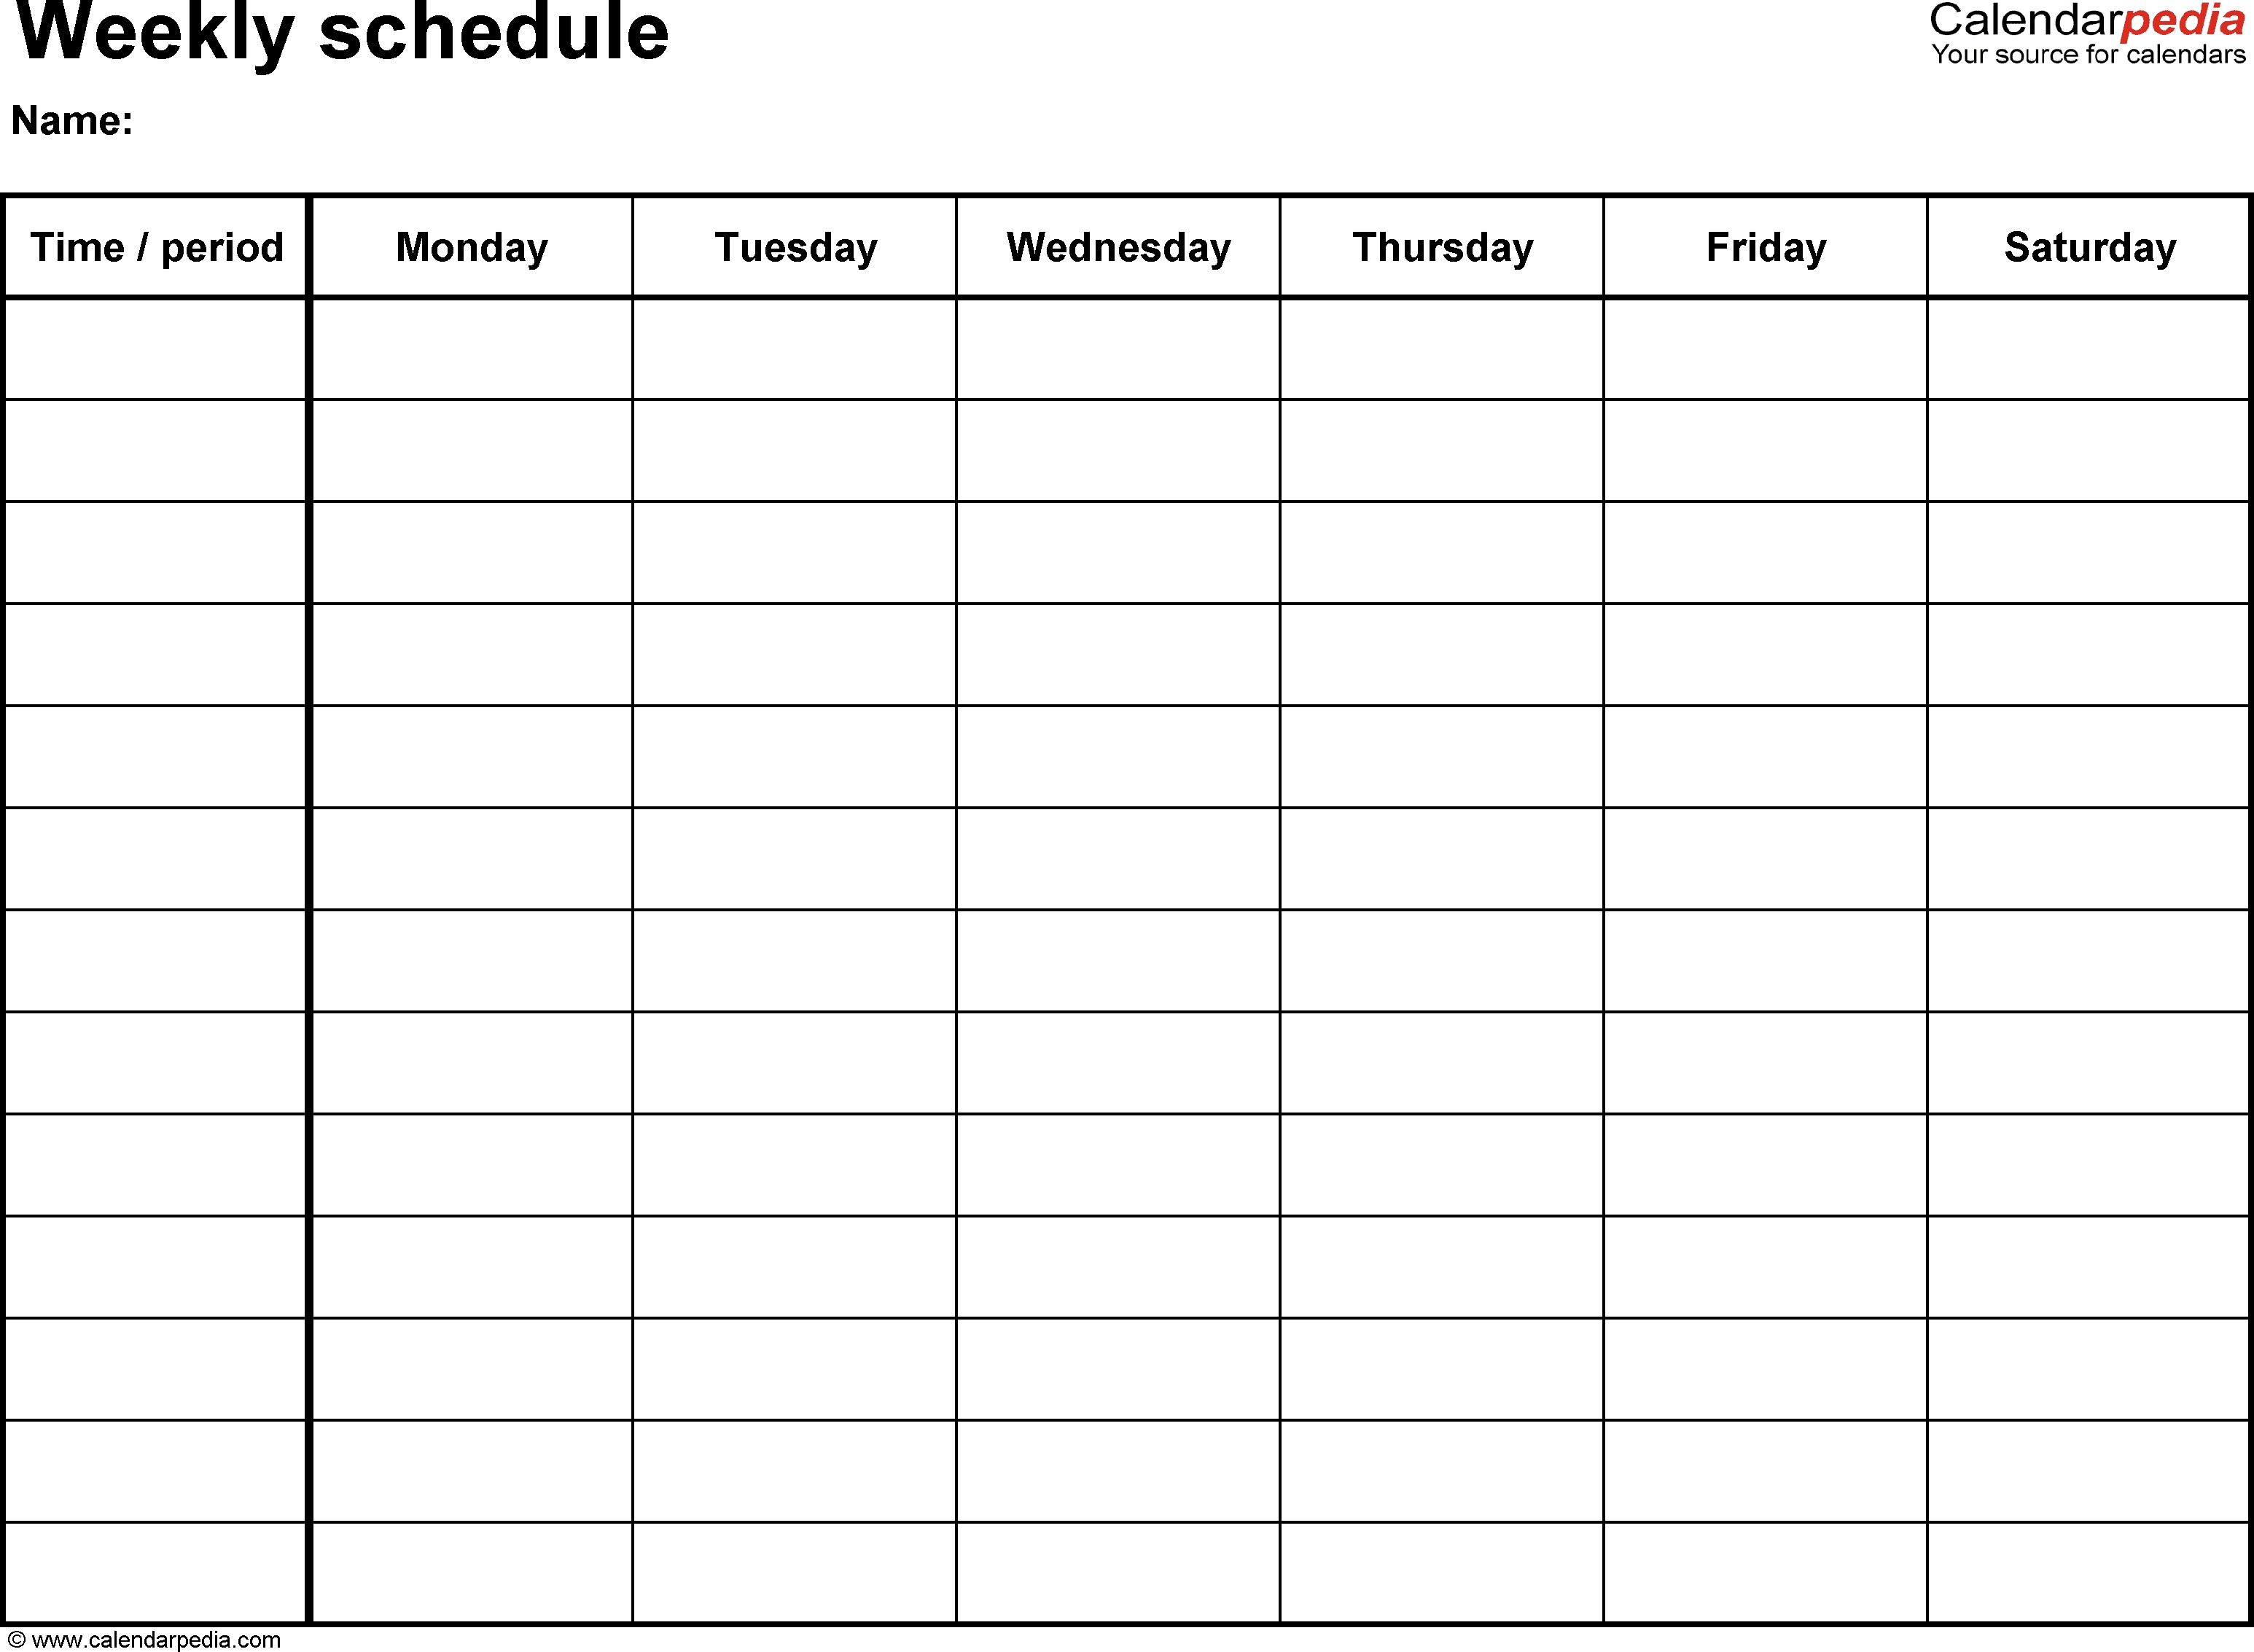 Free Weekly Schedule Templates For Word - 18 Templates with regard to Two Week Calendar Template Free